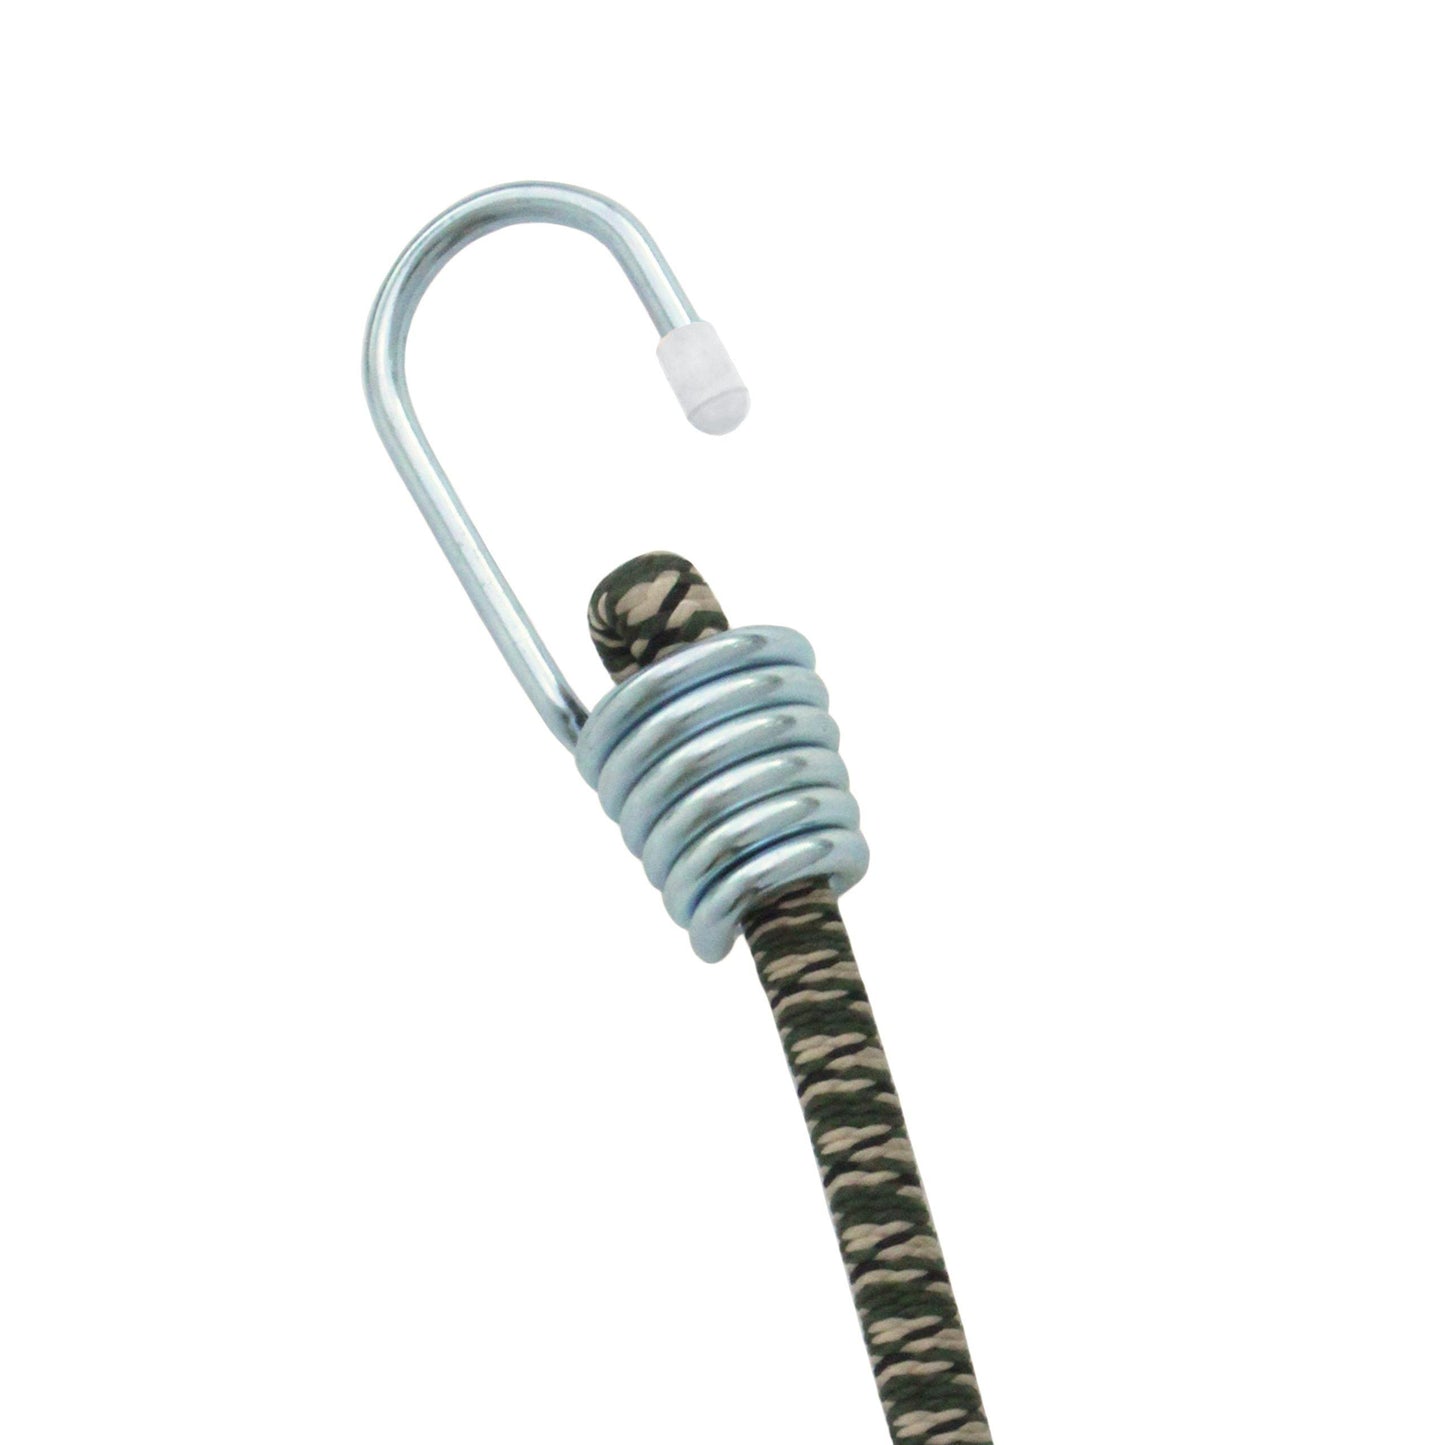 Elastic Cords with Metal Hooks in Camouflage - Boxer Tools